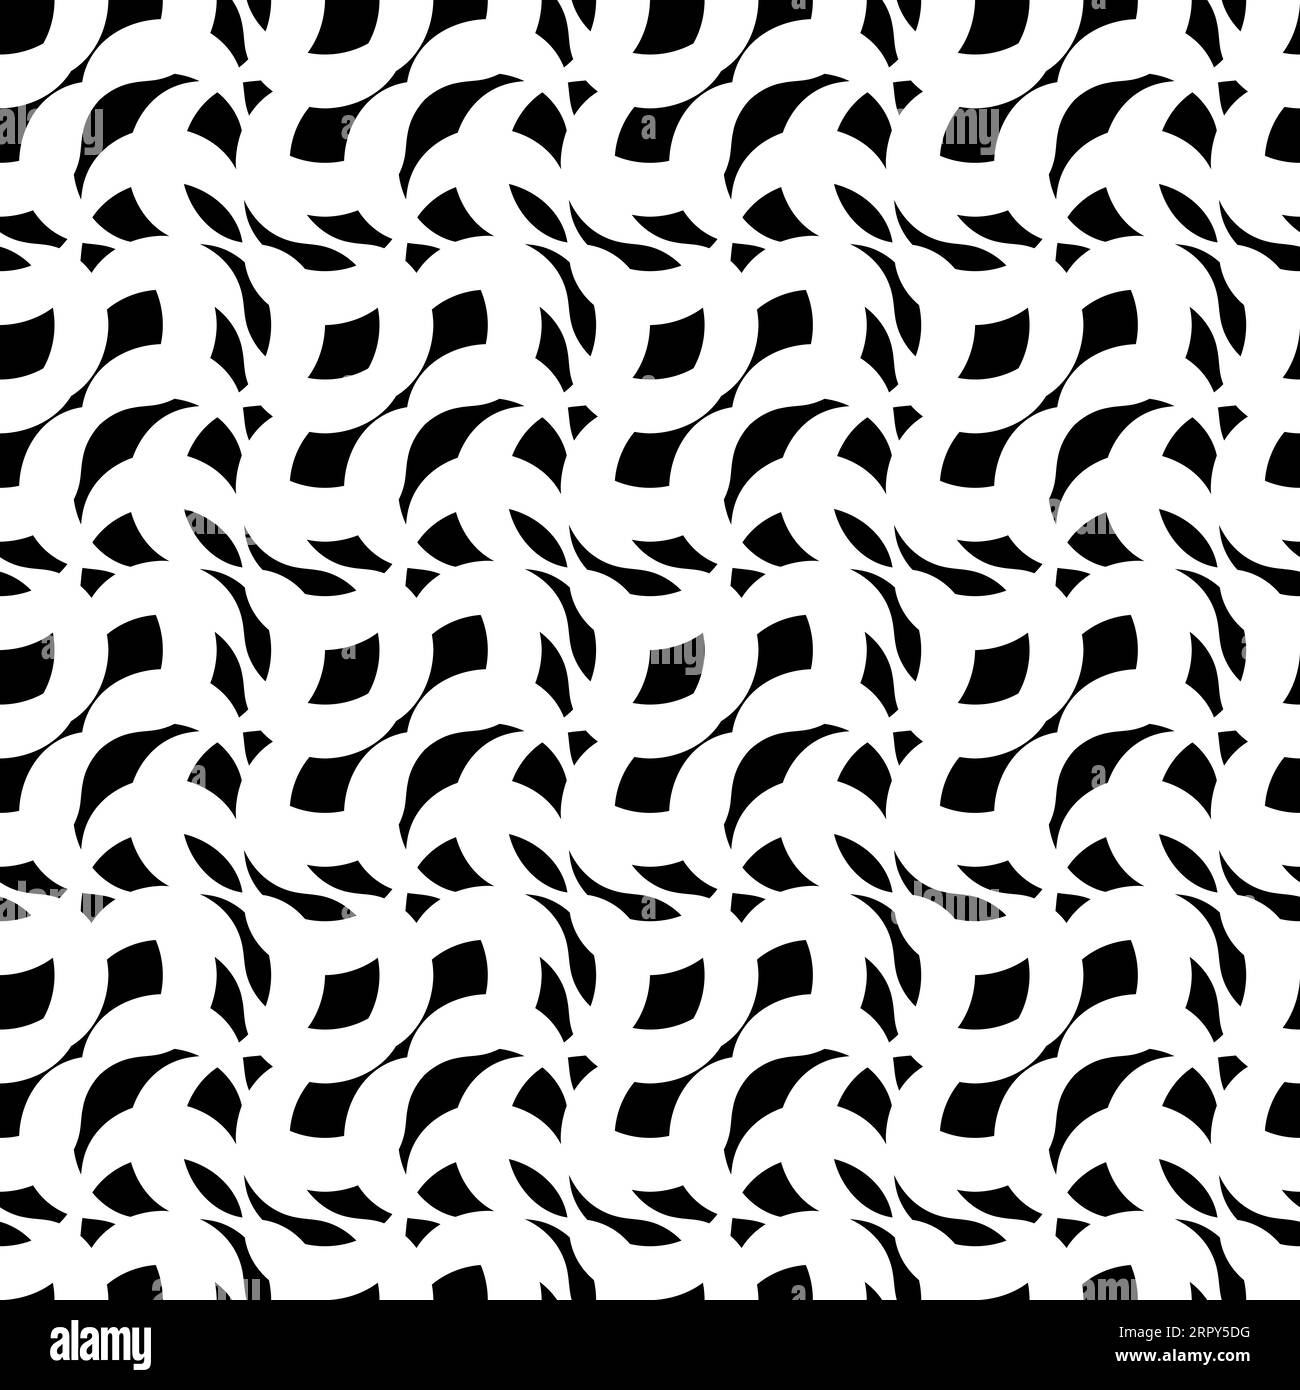 Seamless pattern with abstract motifs in black and white Stock Photo